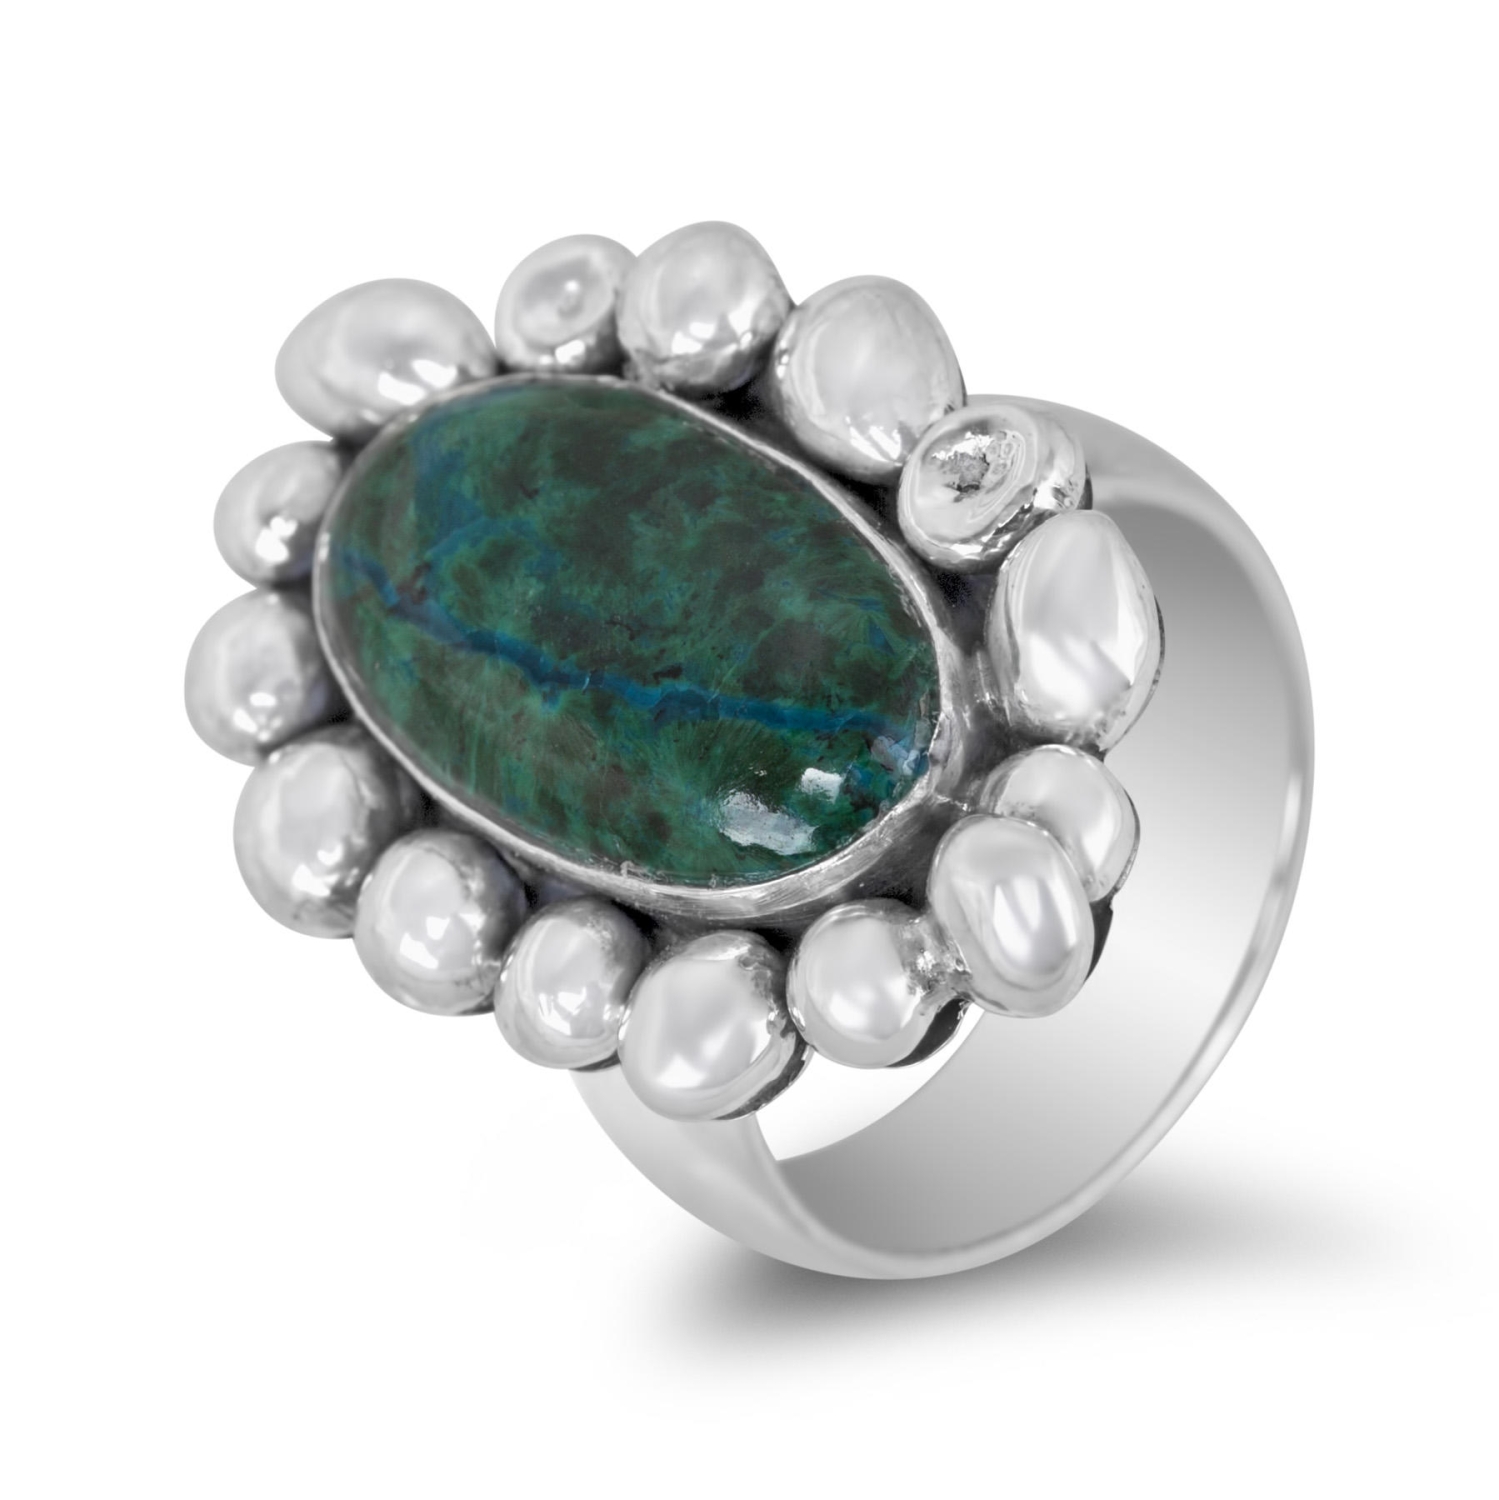 Sterling Silver and Eilat Stone Pebbles Ring - 1